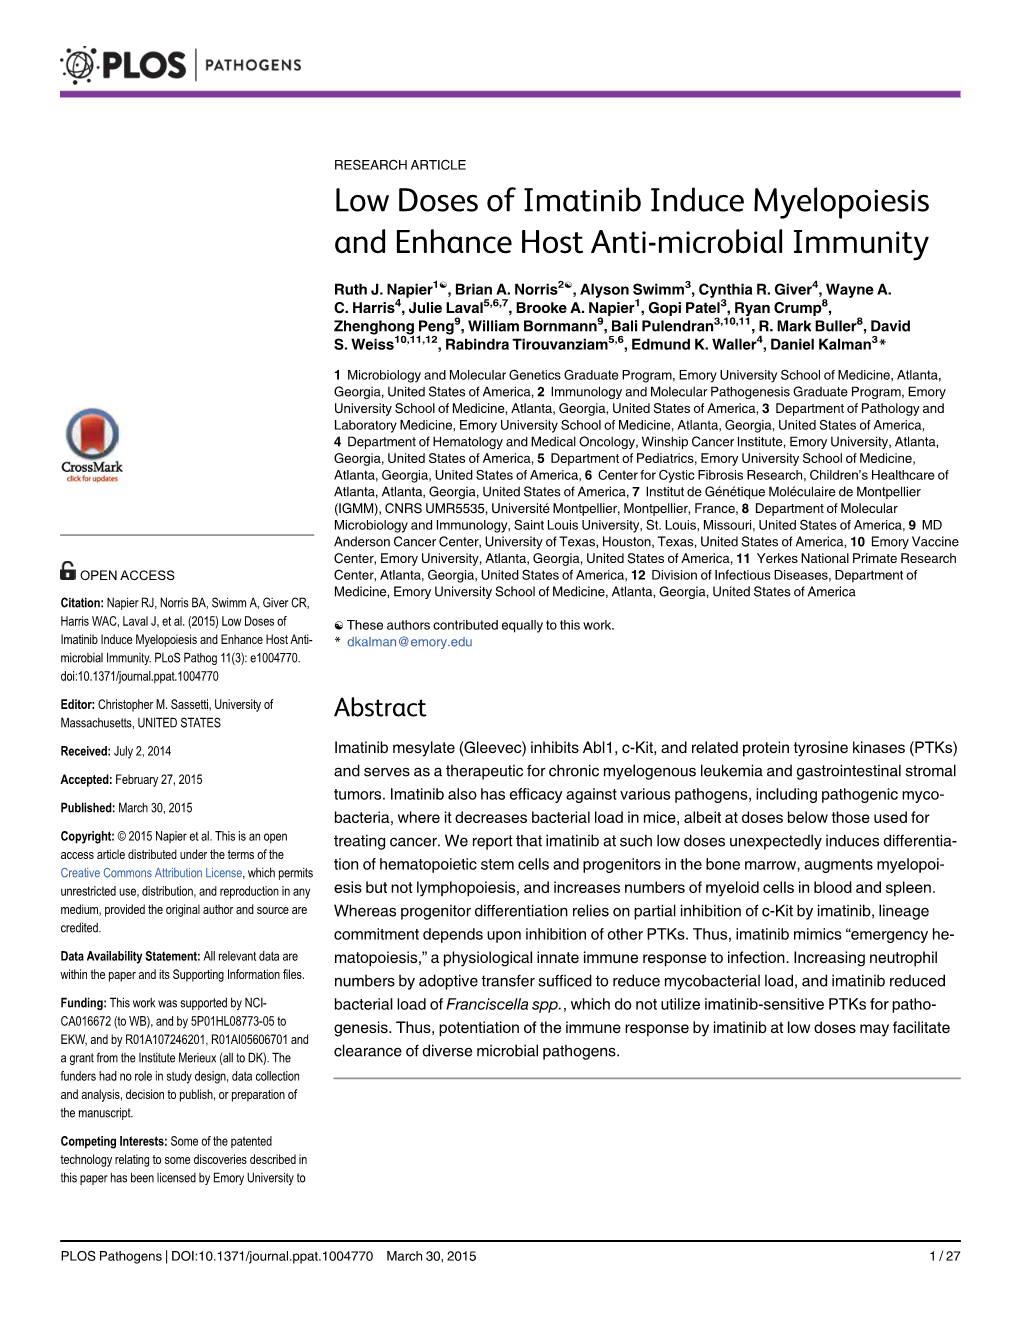 Low Doses of Imatinib Induce Myelopoiesis and Enhance Host Anti-Microbial Immunity